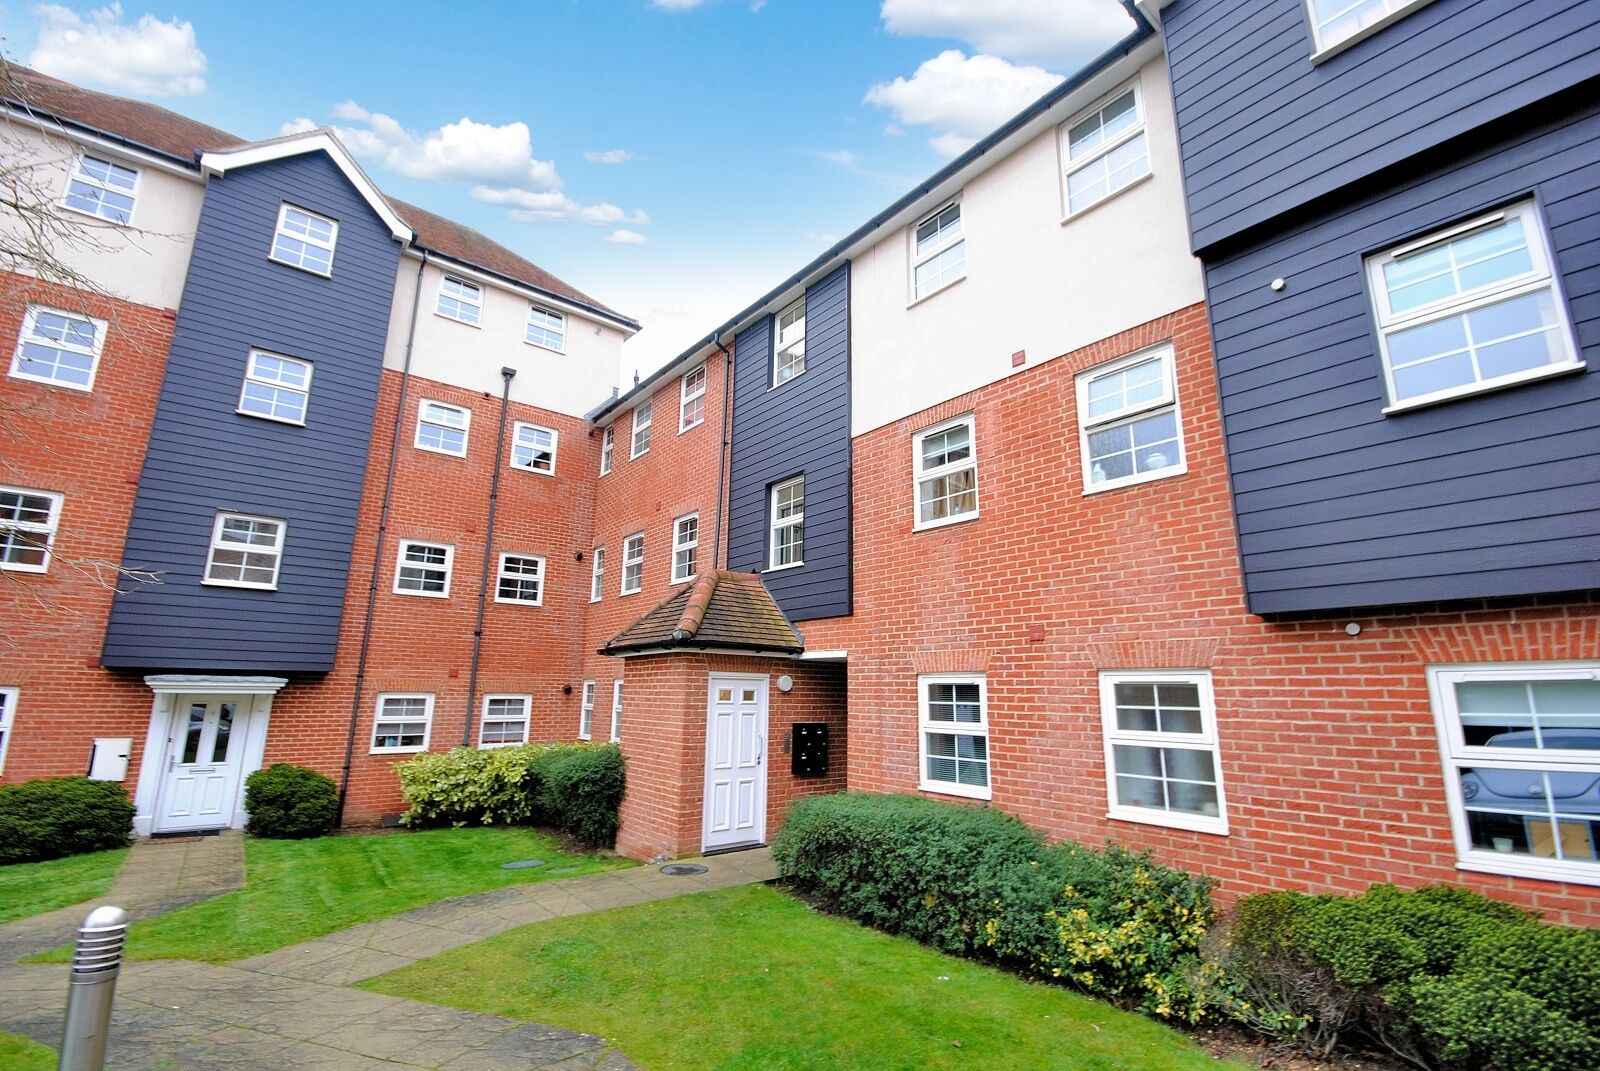 2 bedroom  flat to rent, Available from 08/05/2024 Hockerill Street, Bishop's Stortford, CM23, main image